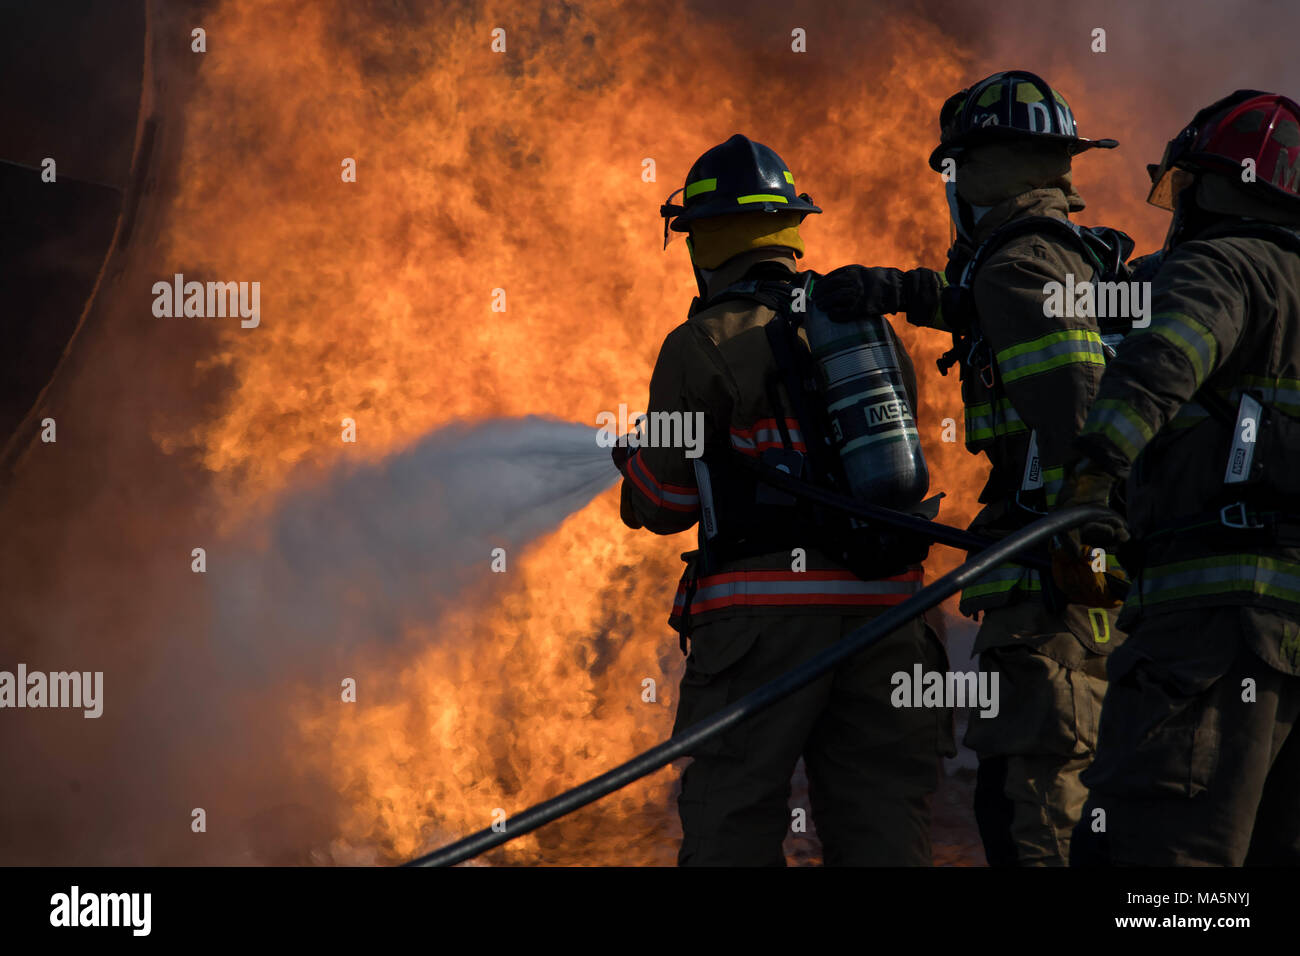 Engineer Ross Dees, Captain Marcus Houston and Engineer DeMarcus Murray, Shreveport Fire Department firefighters, extinguish a fire during an annual recertification burn at Barksdale Air Force Base, La., March 20, 2018.  The Federal Aviation Administration requires SFD firefighters to complete this training annually to ensure personnel are proficient in techniques and required duties. (U.S. Air Force photo by Airman 1st Class Tessa B. Corrick) Stock Photo